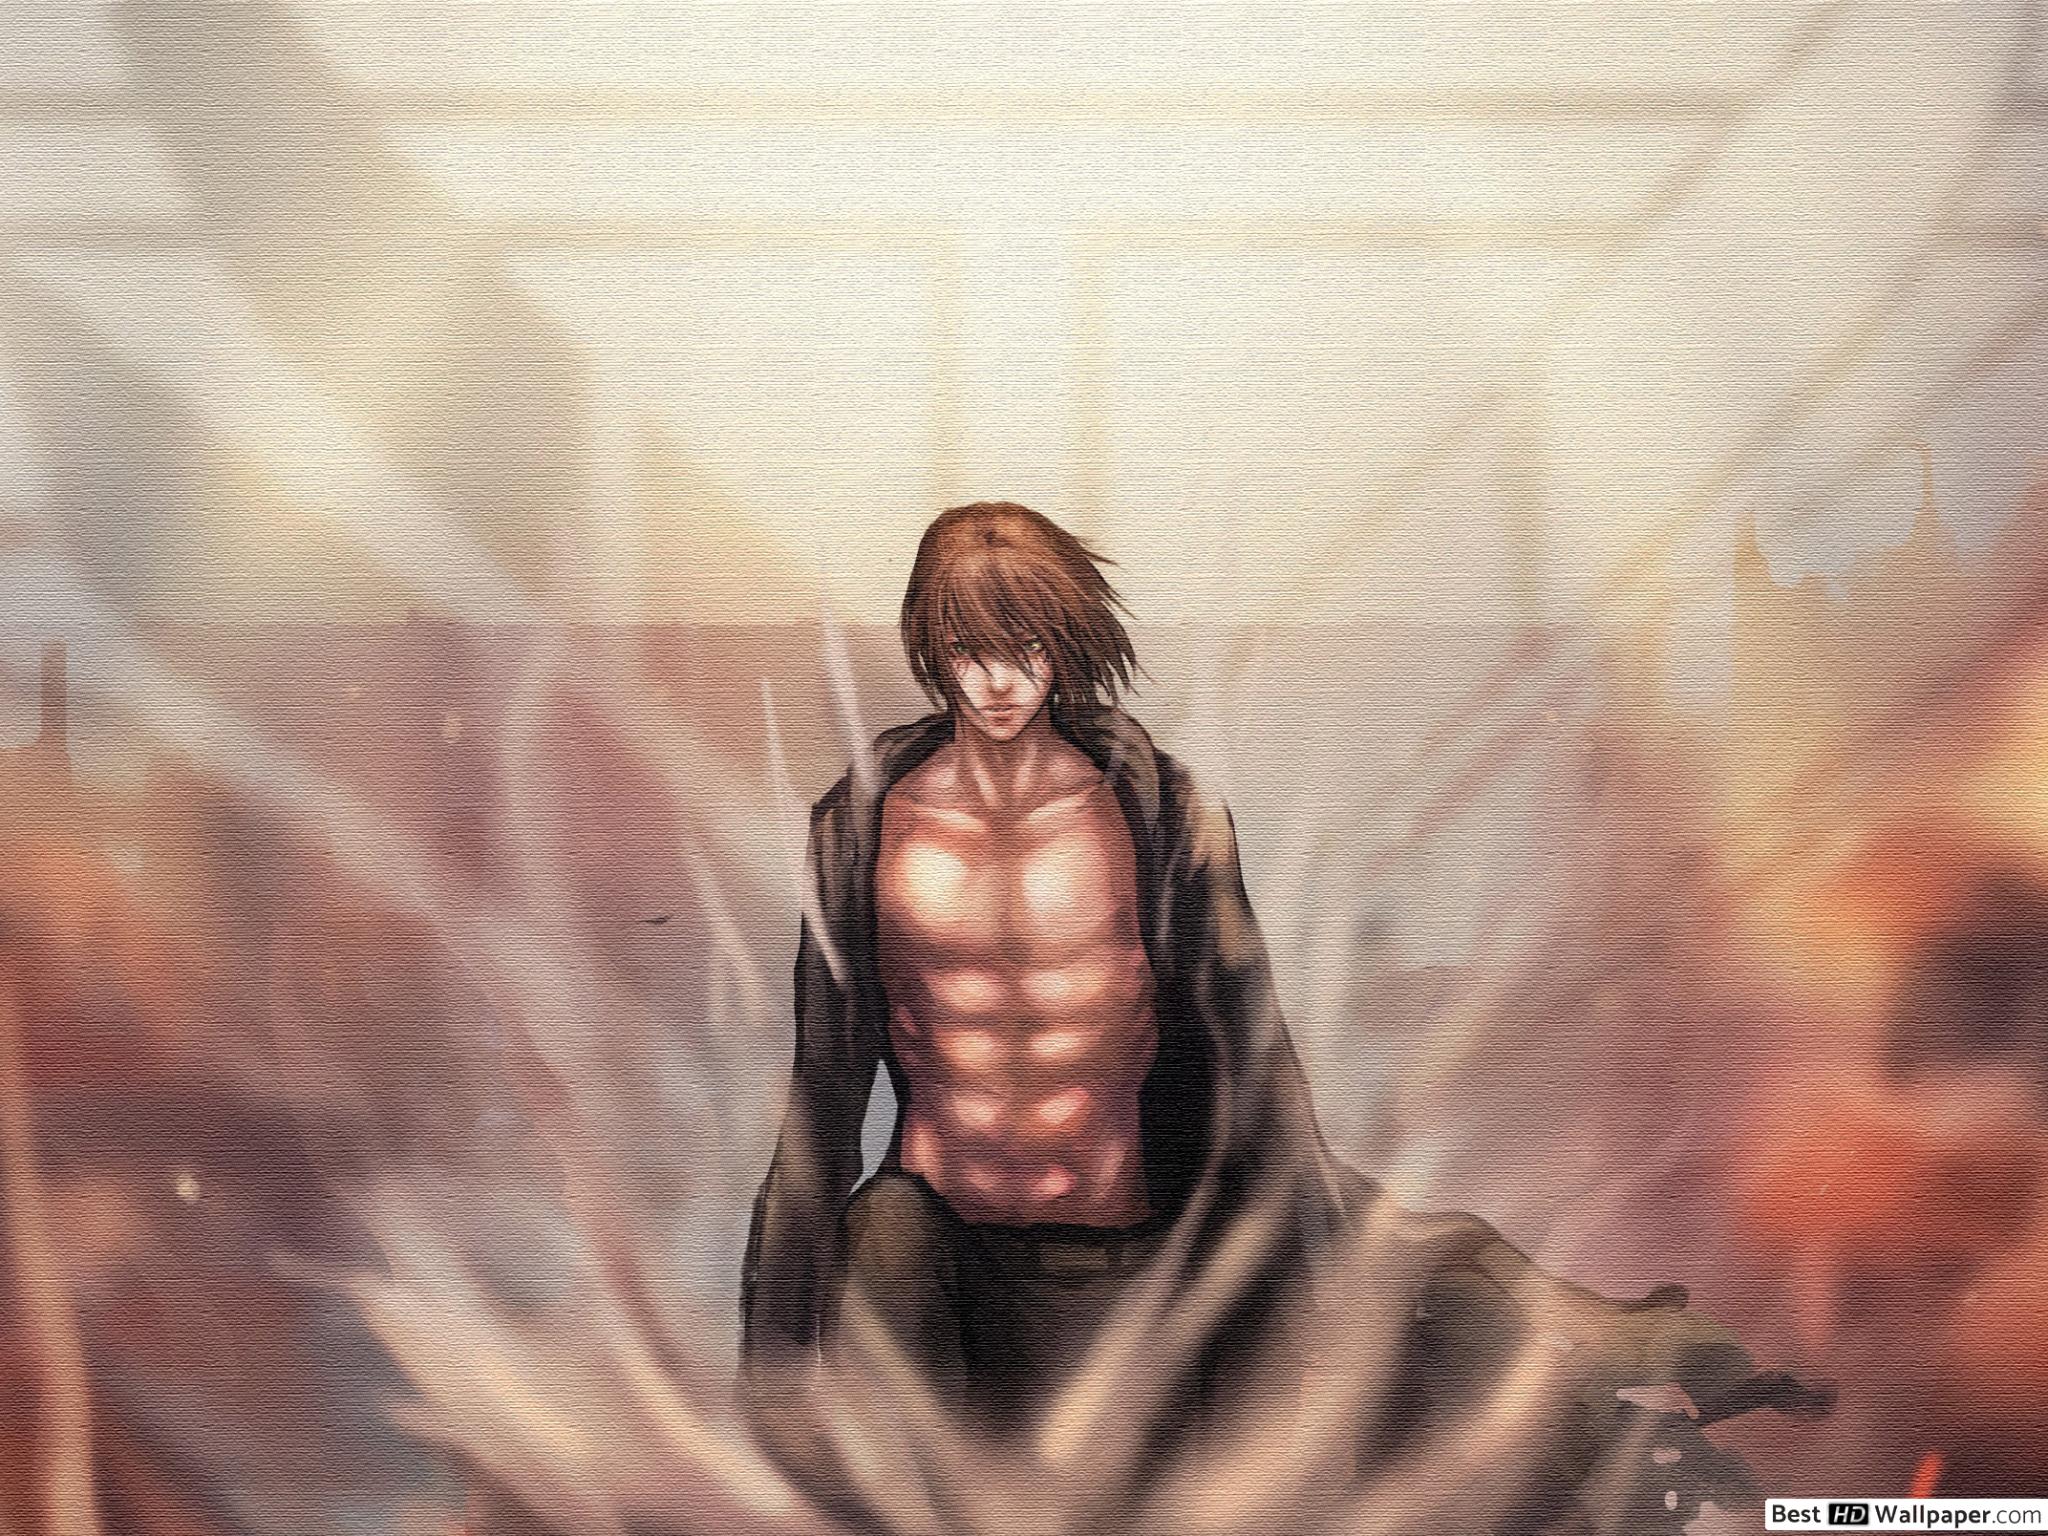 Eren S4 Wallpapers Wallpaper Cave Since i'm too impatient to see eren animated with long hair from ch.90…i drew it myself muahahaha > i tried to copy the animation st. eren s4 wallpapers wallpaper cave